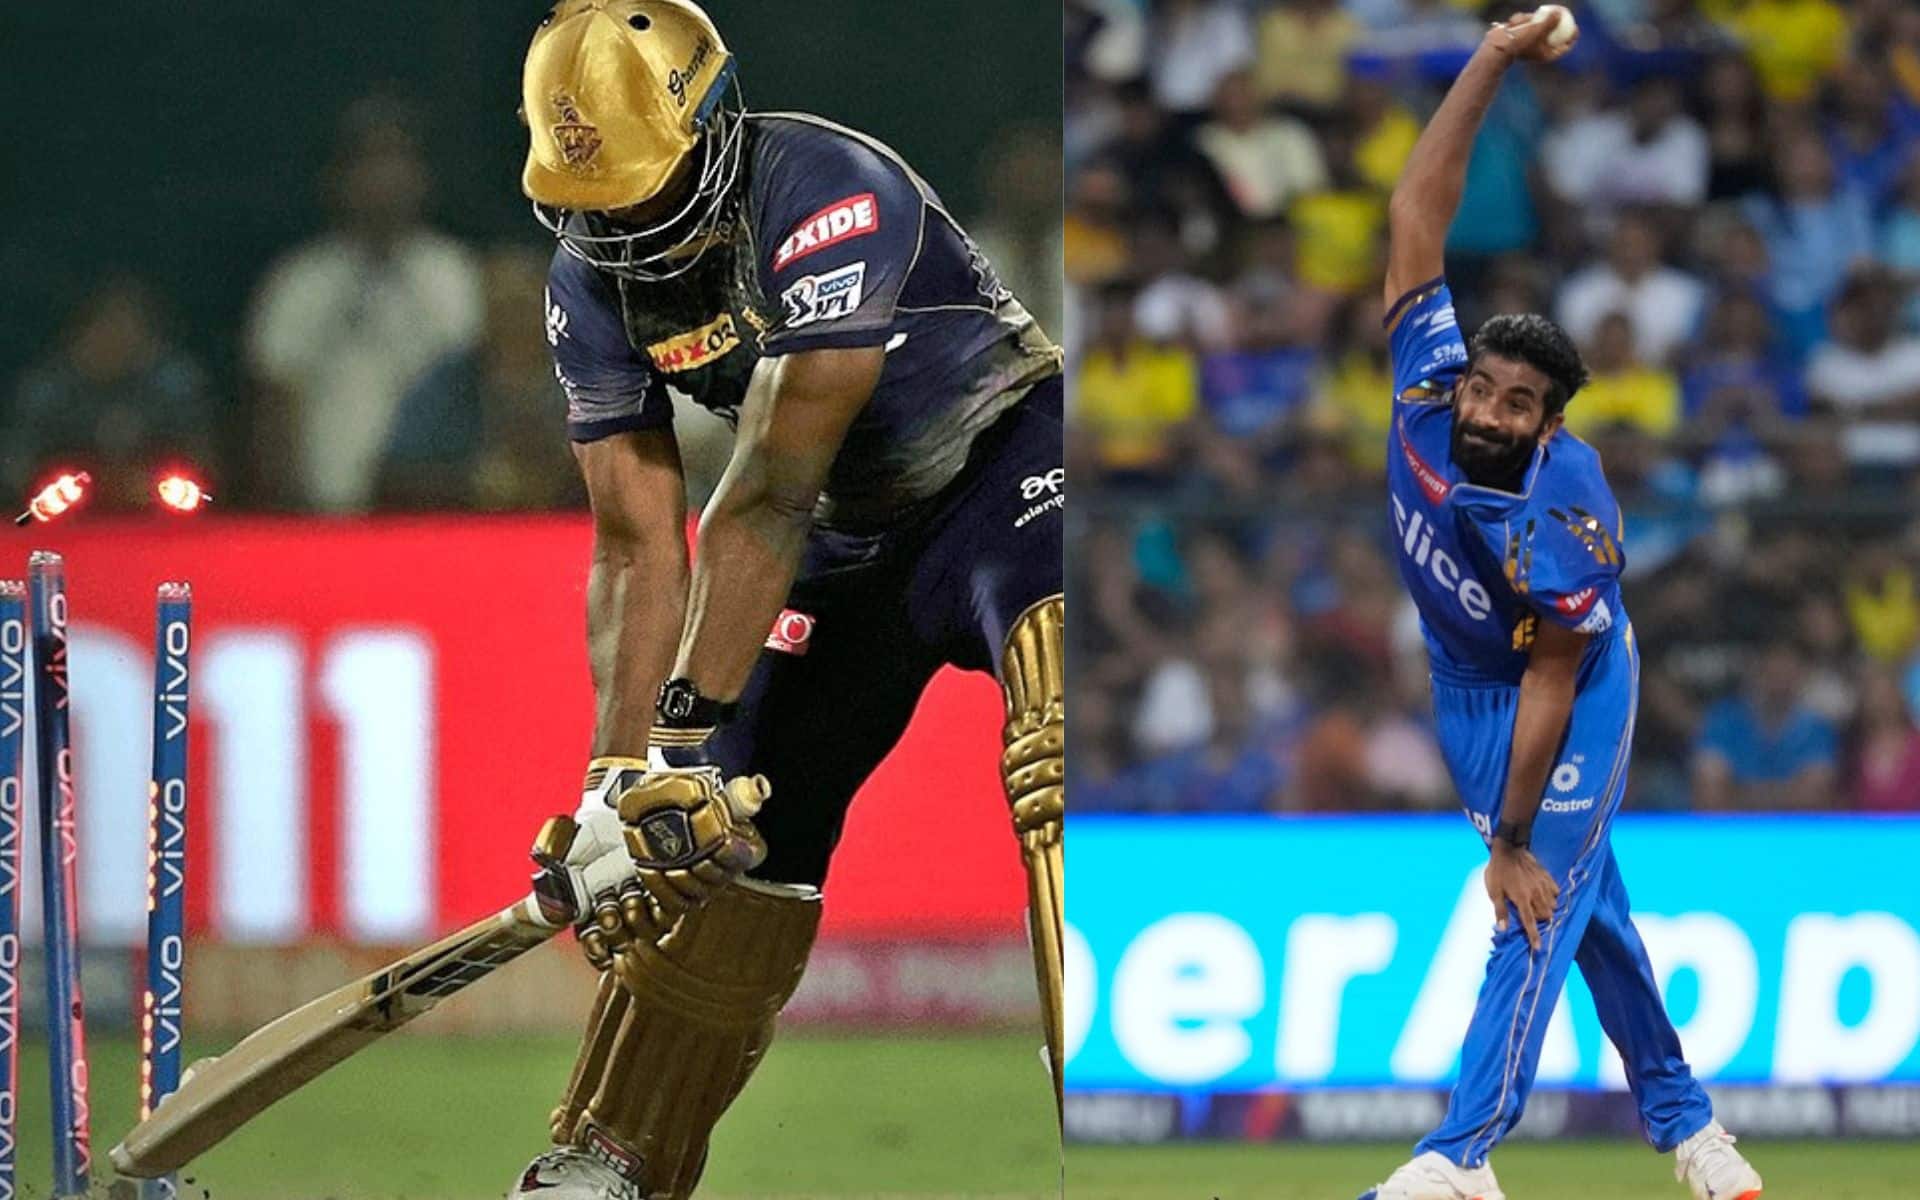 Jasprit Bumrah To Dismiss Andre Russell? 3 Player Battles To Watch Out For In KKR vs MI